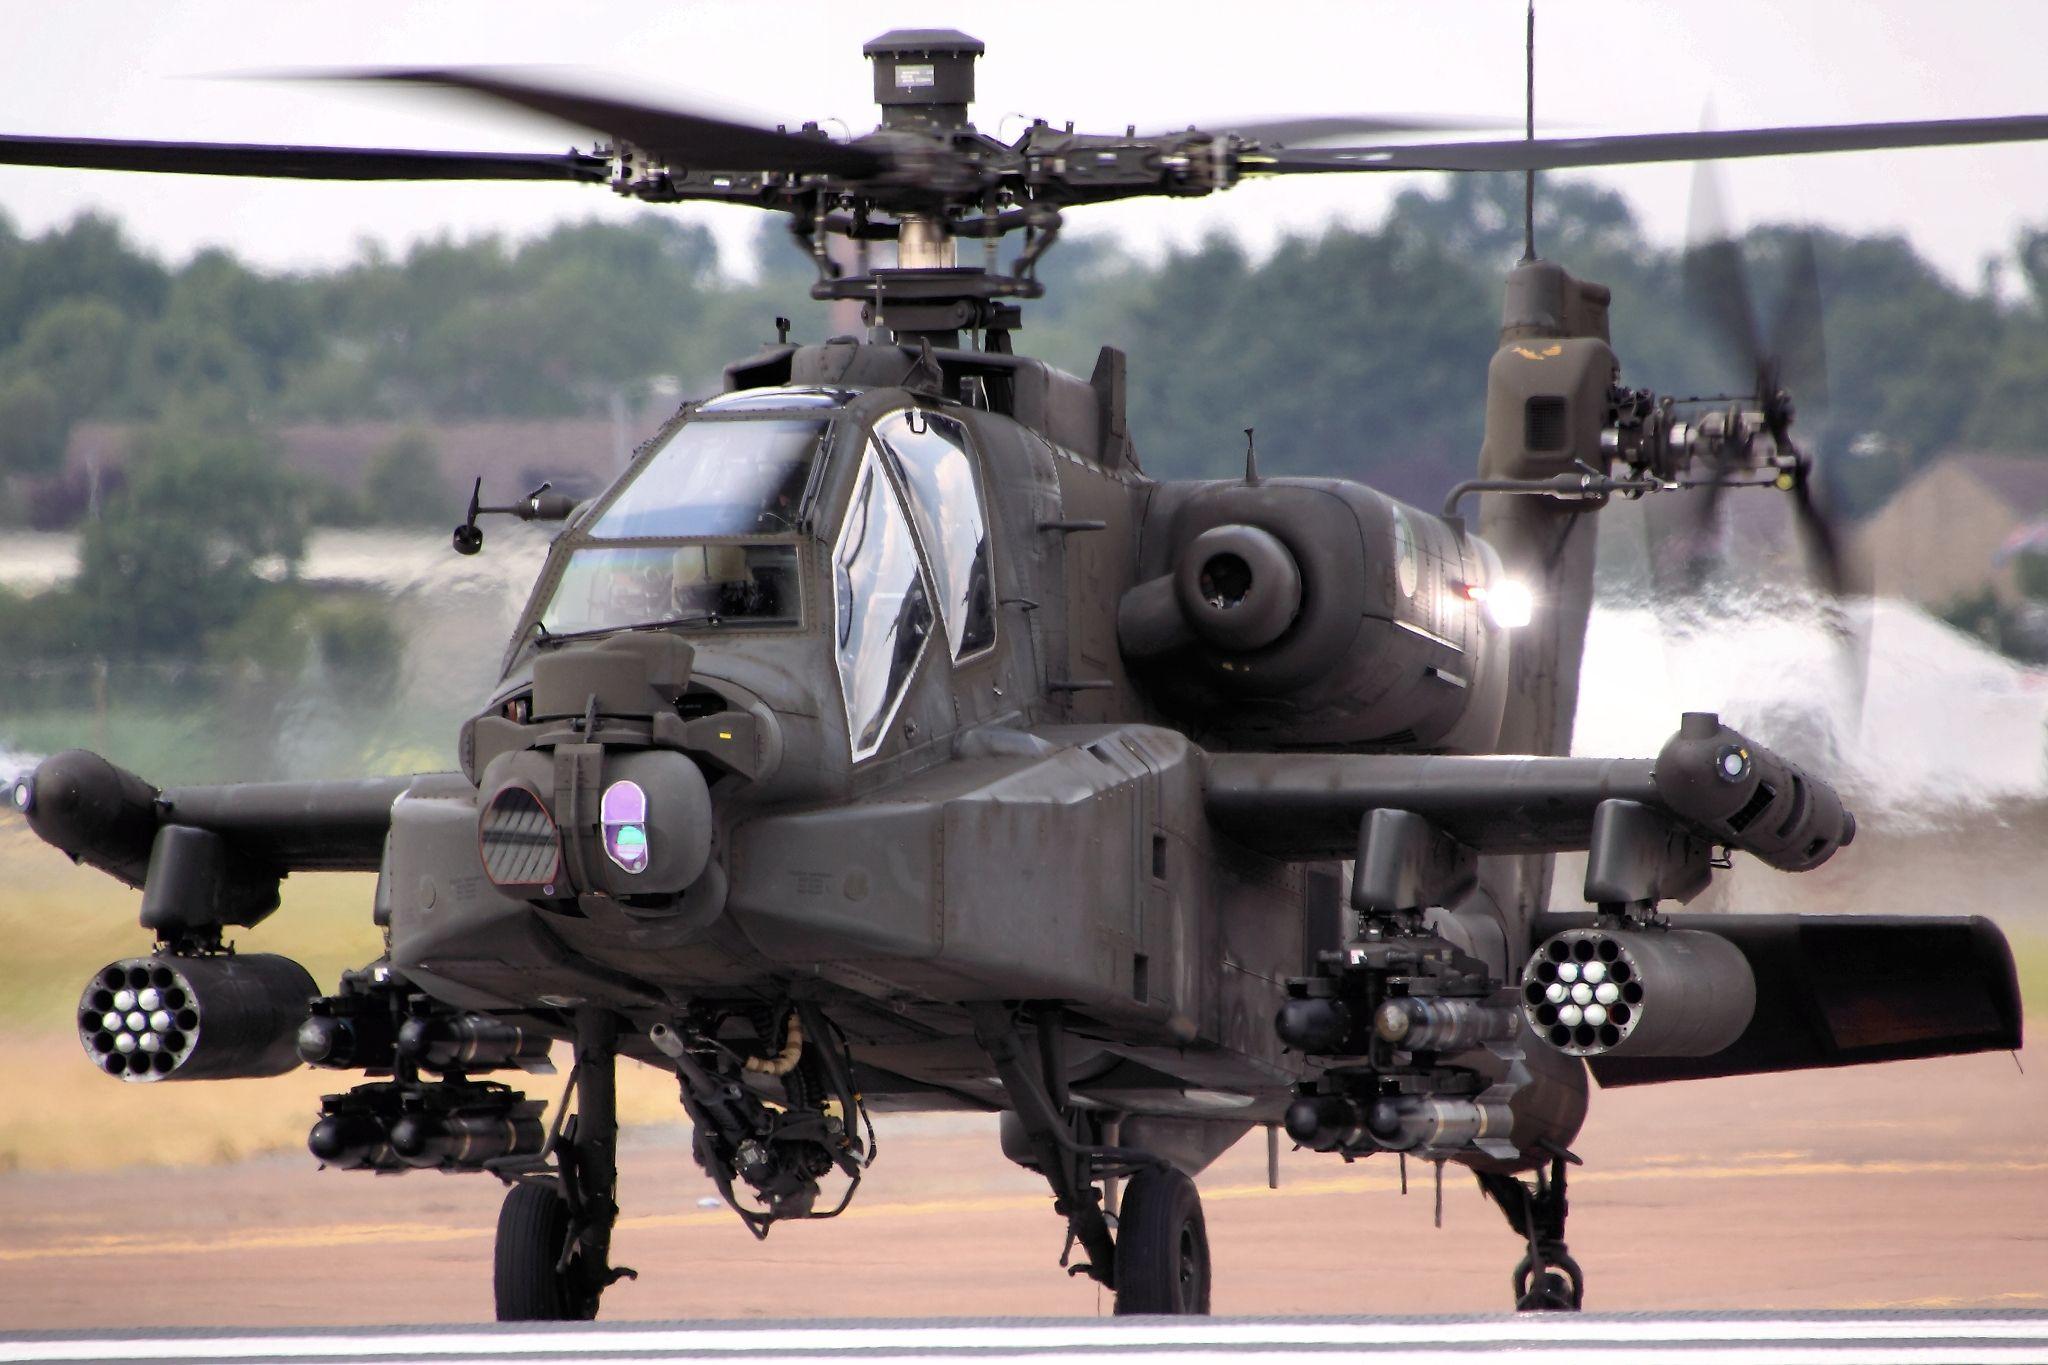 Free Apache Helicopter Image